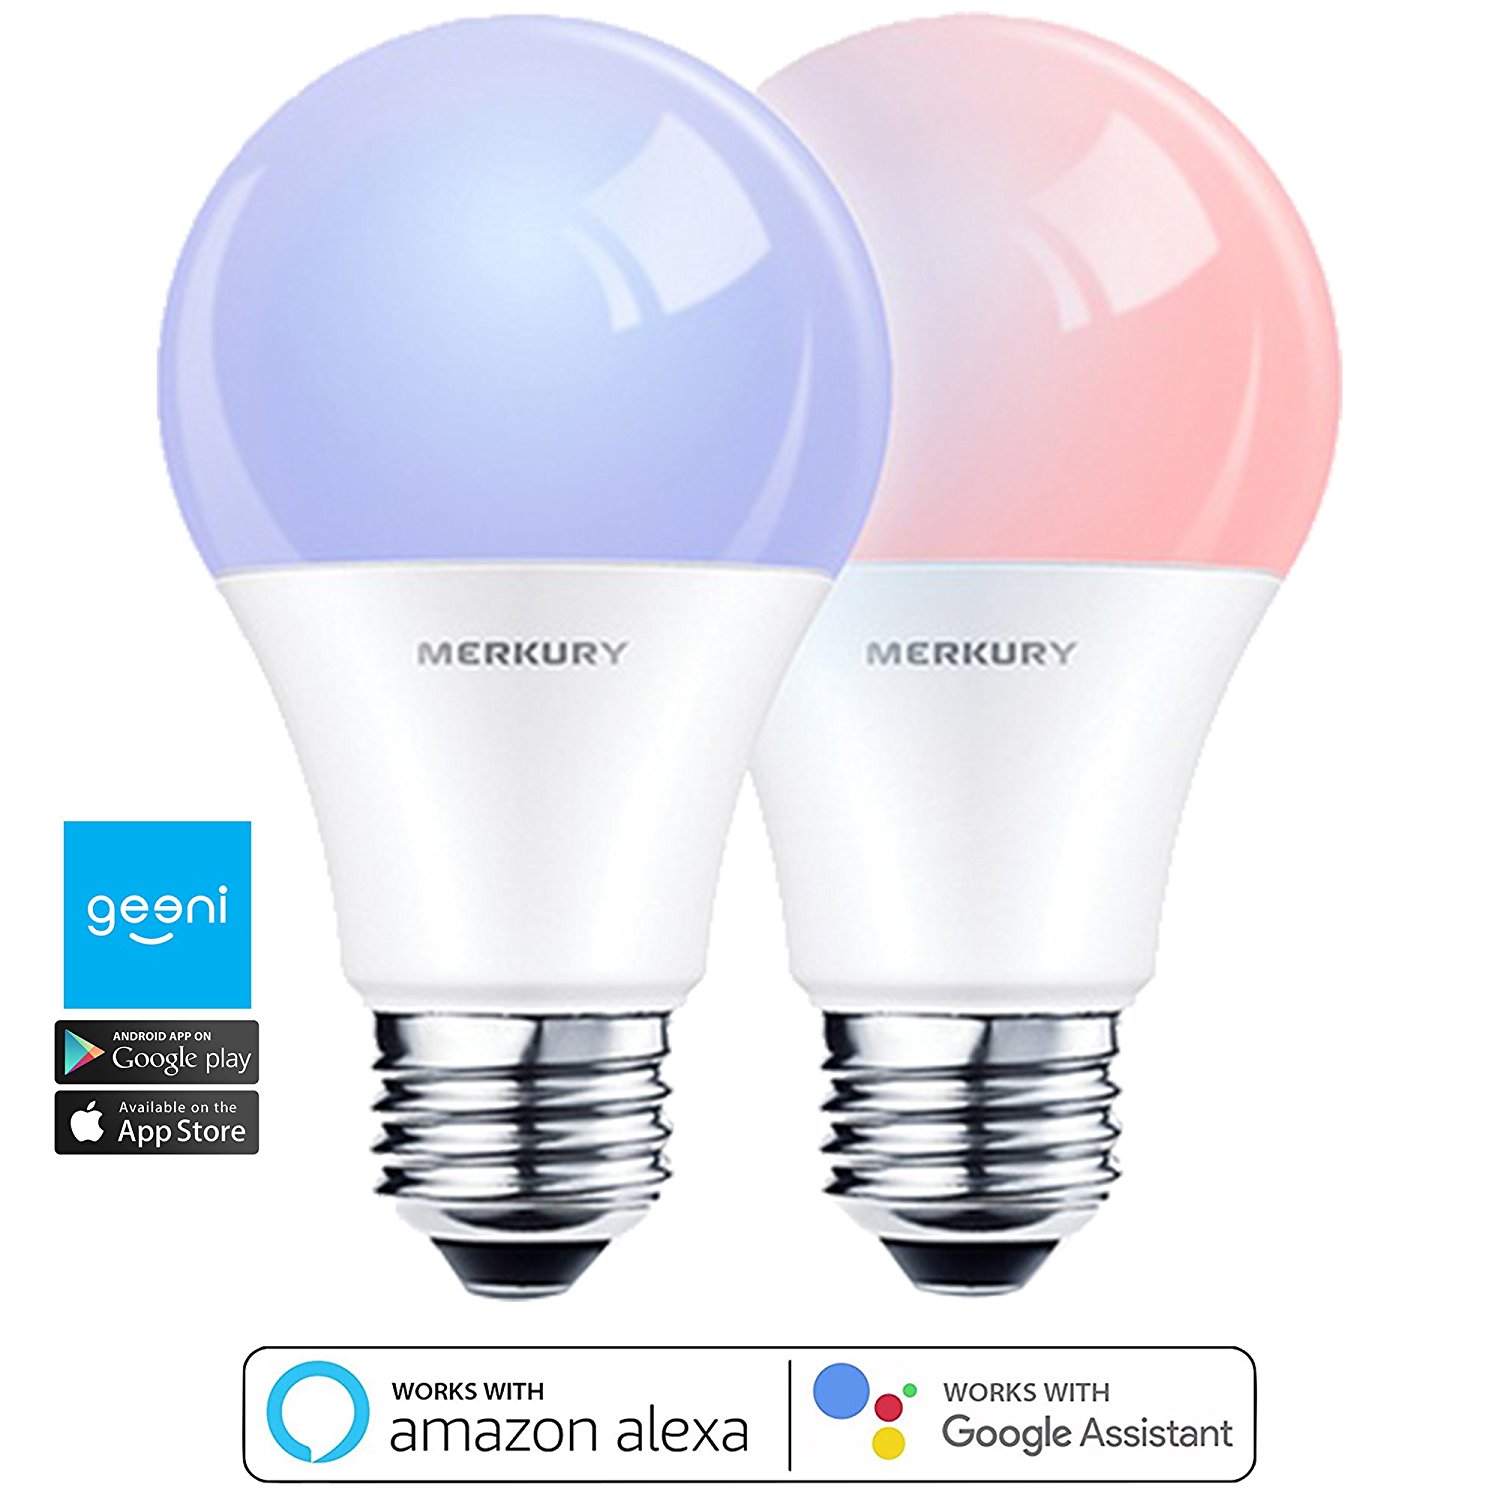 Today only: 2 Merkury color LED Wi-Fi bulbs for $29